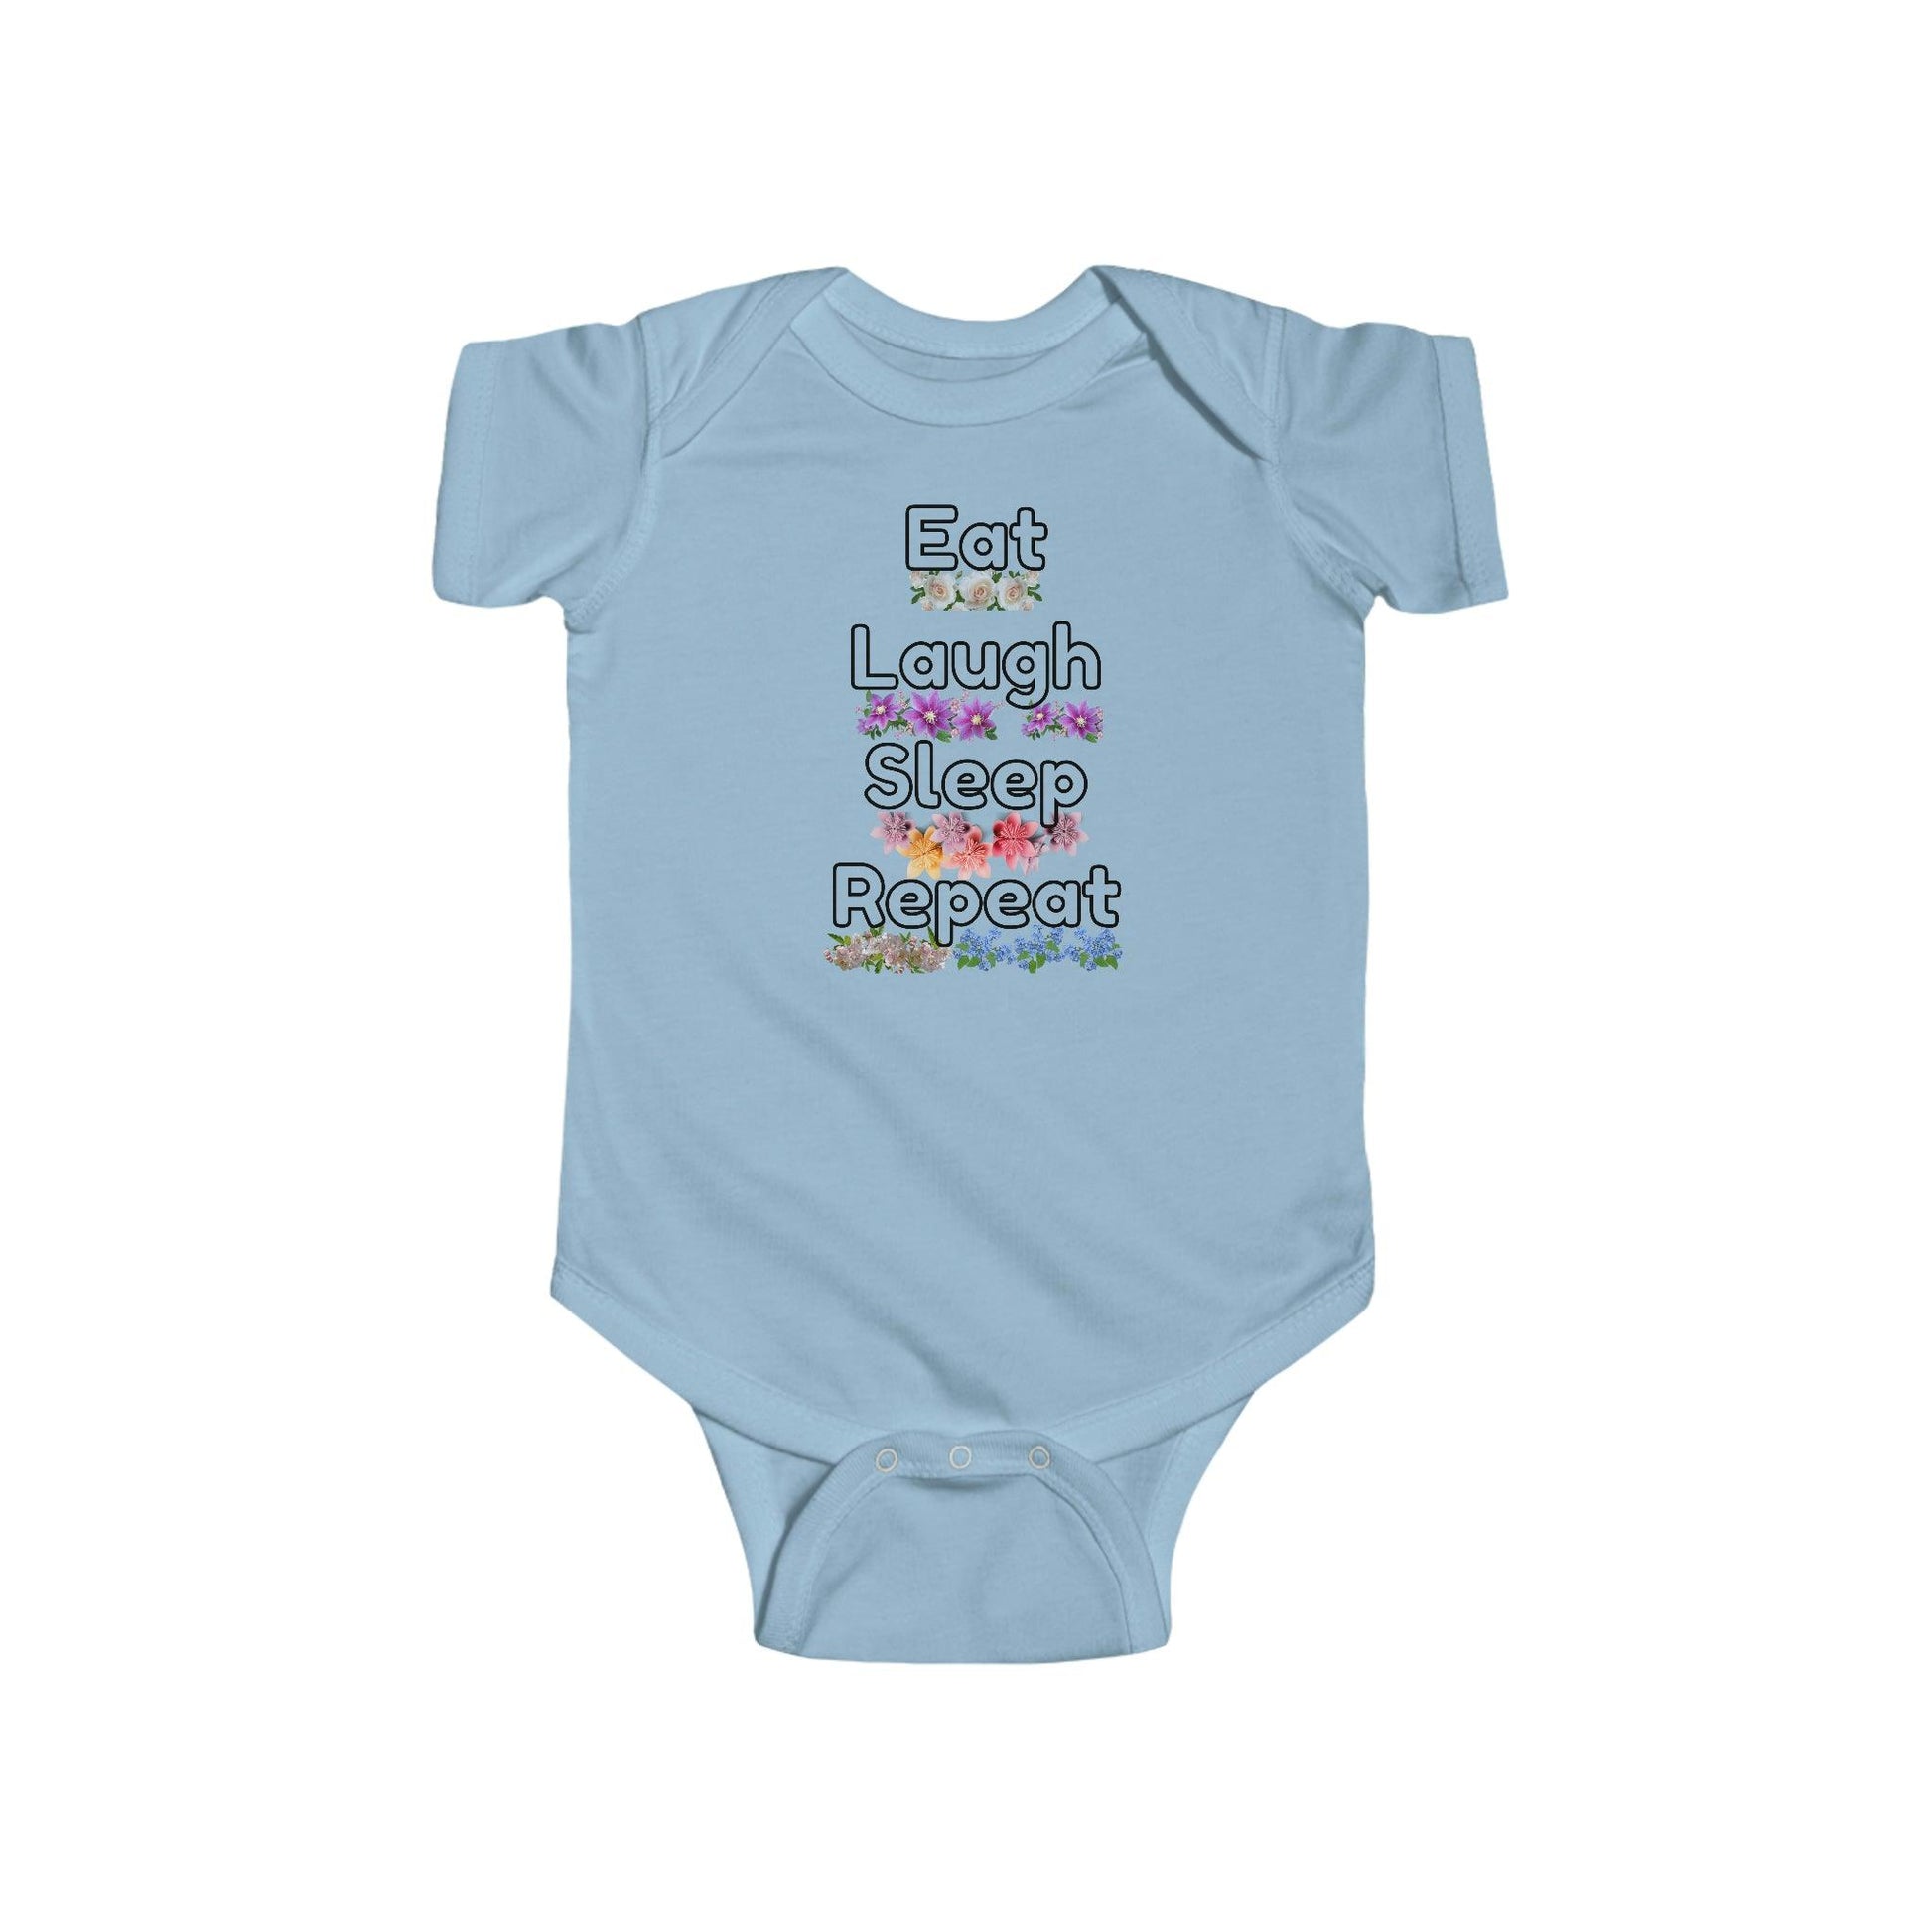 Baby Onesies - Baby gifts - Bodysuit - Baby clothes - Eat laugh sleep repeat - Giftsmojo